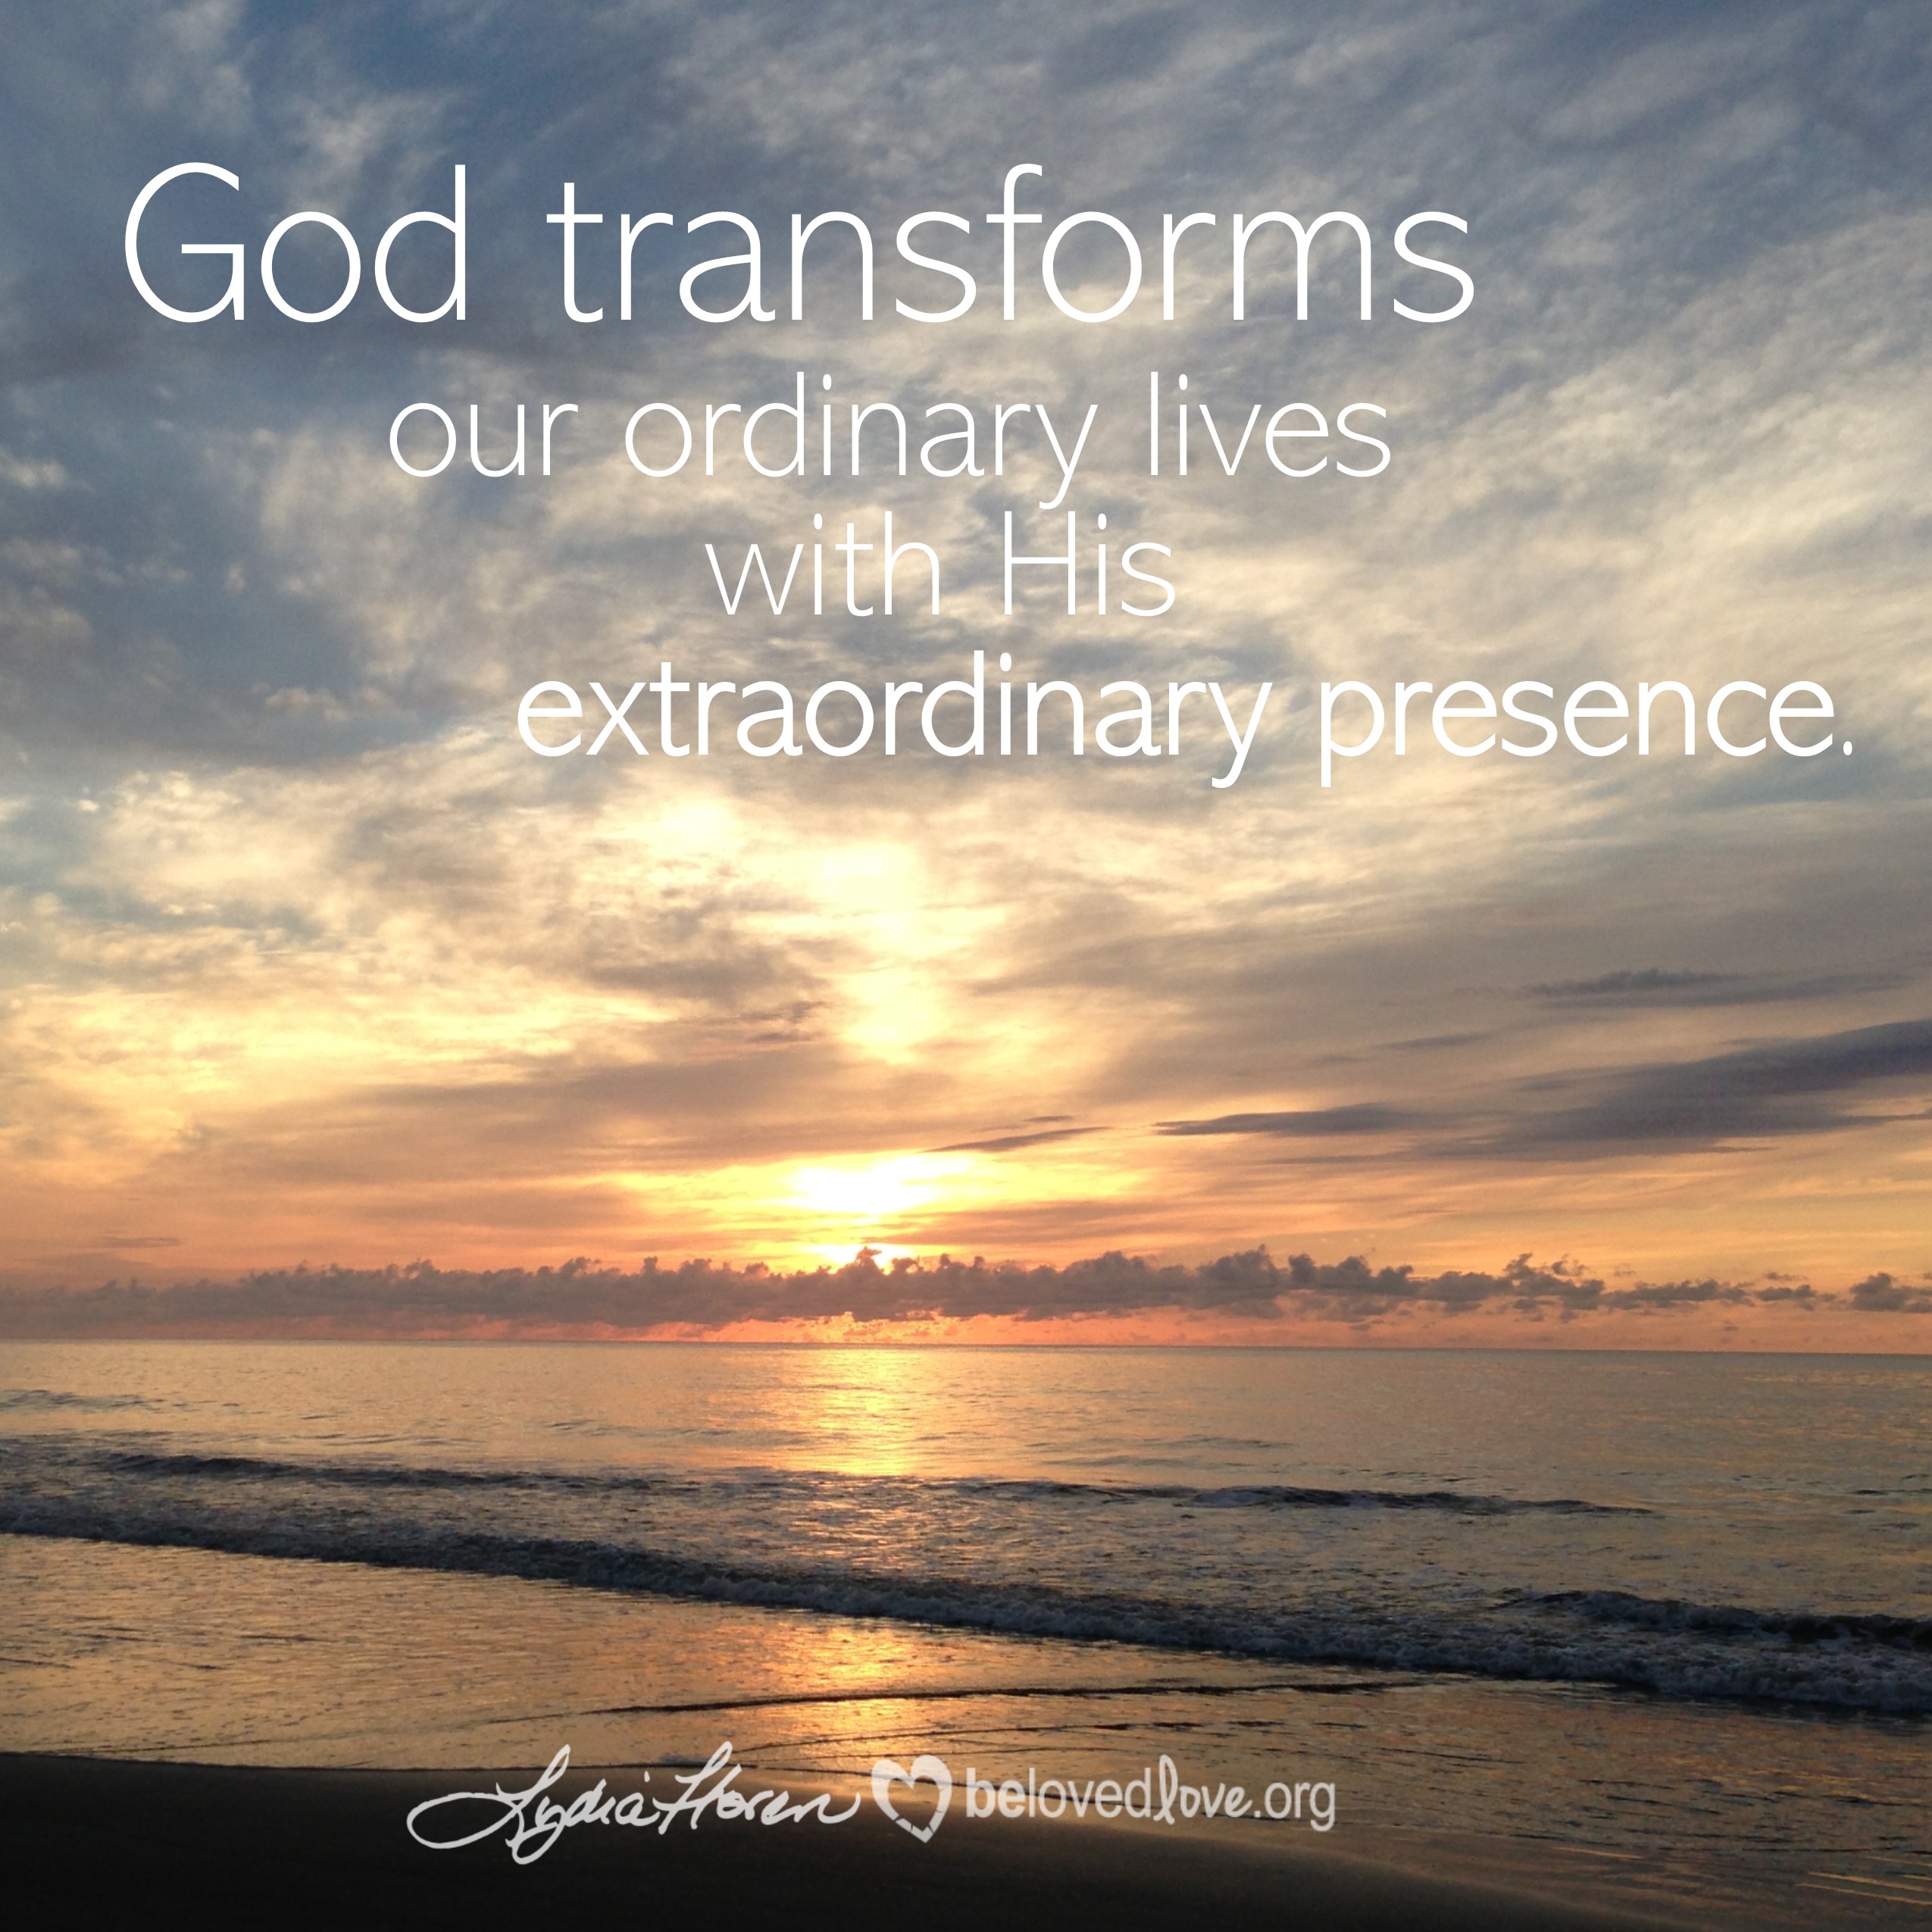 God transforms our ordinary lives with His extraordinary presence.